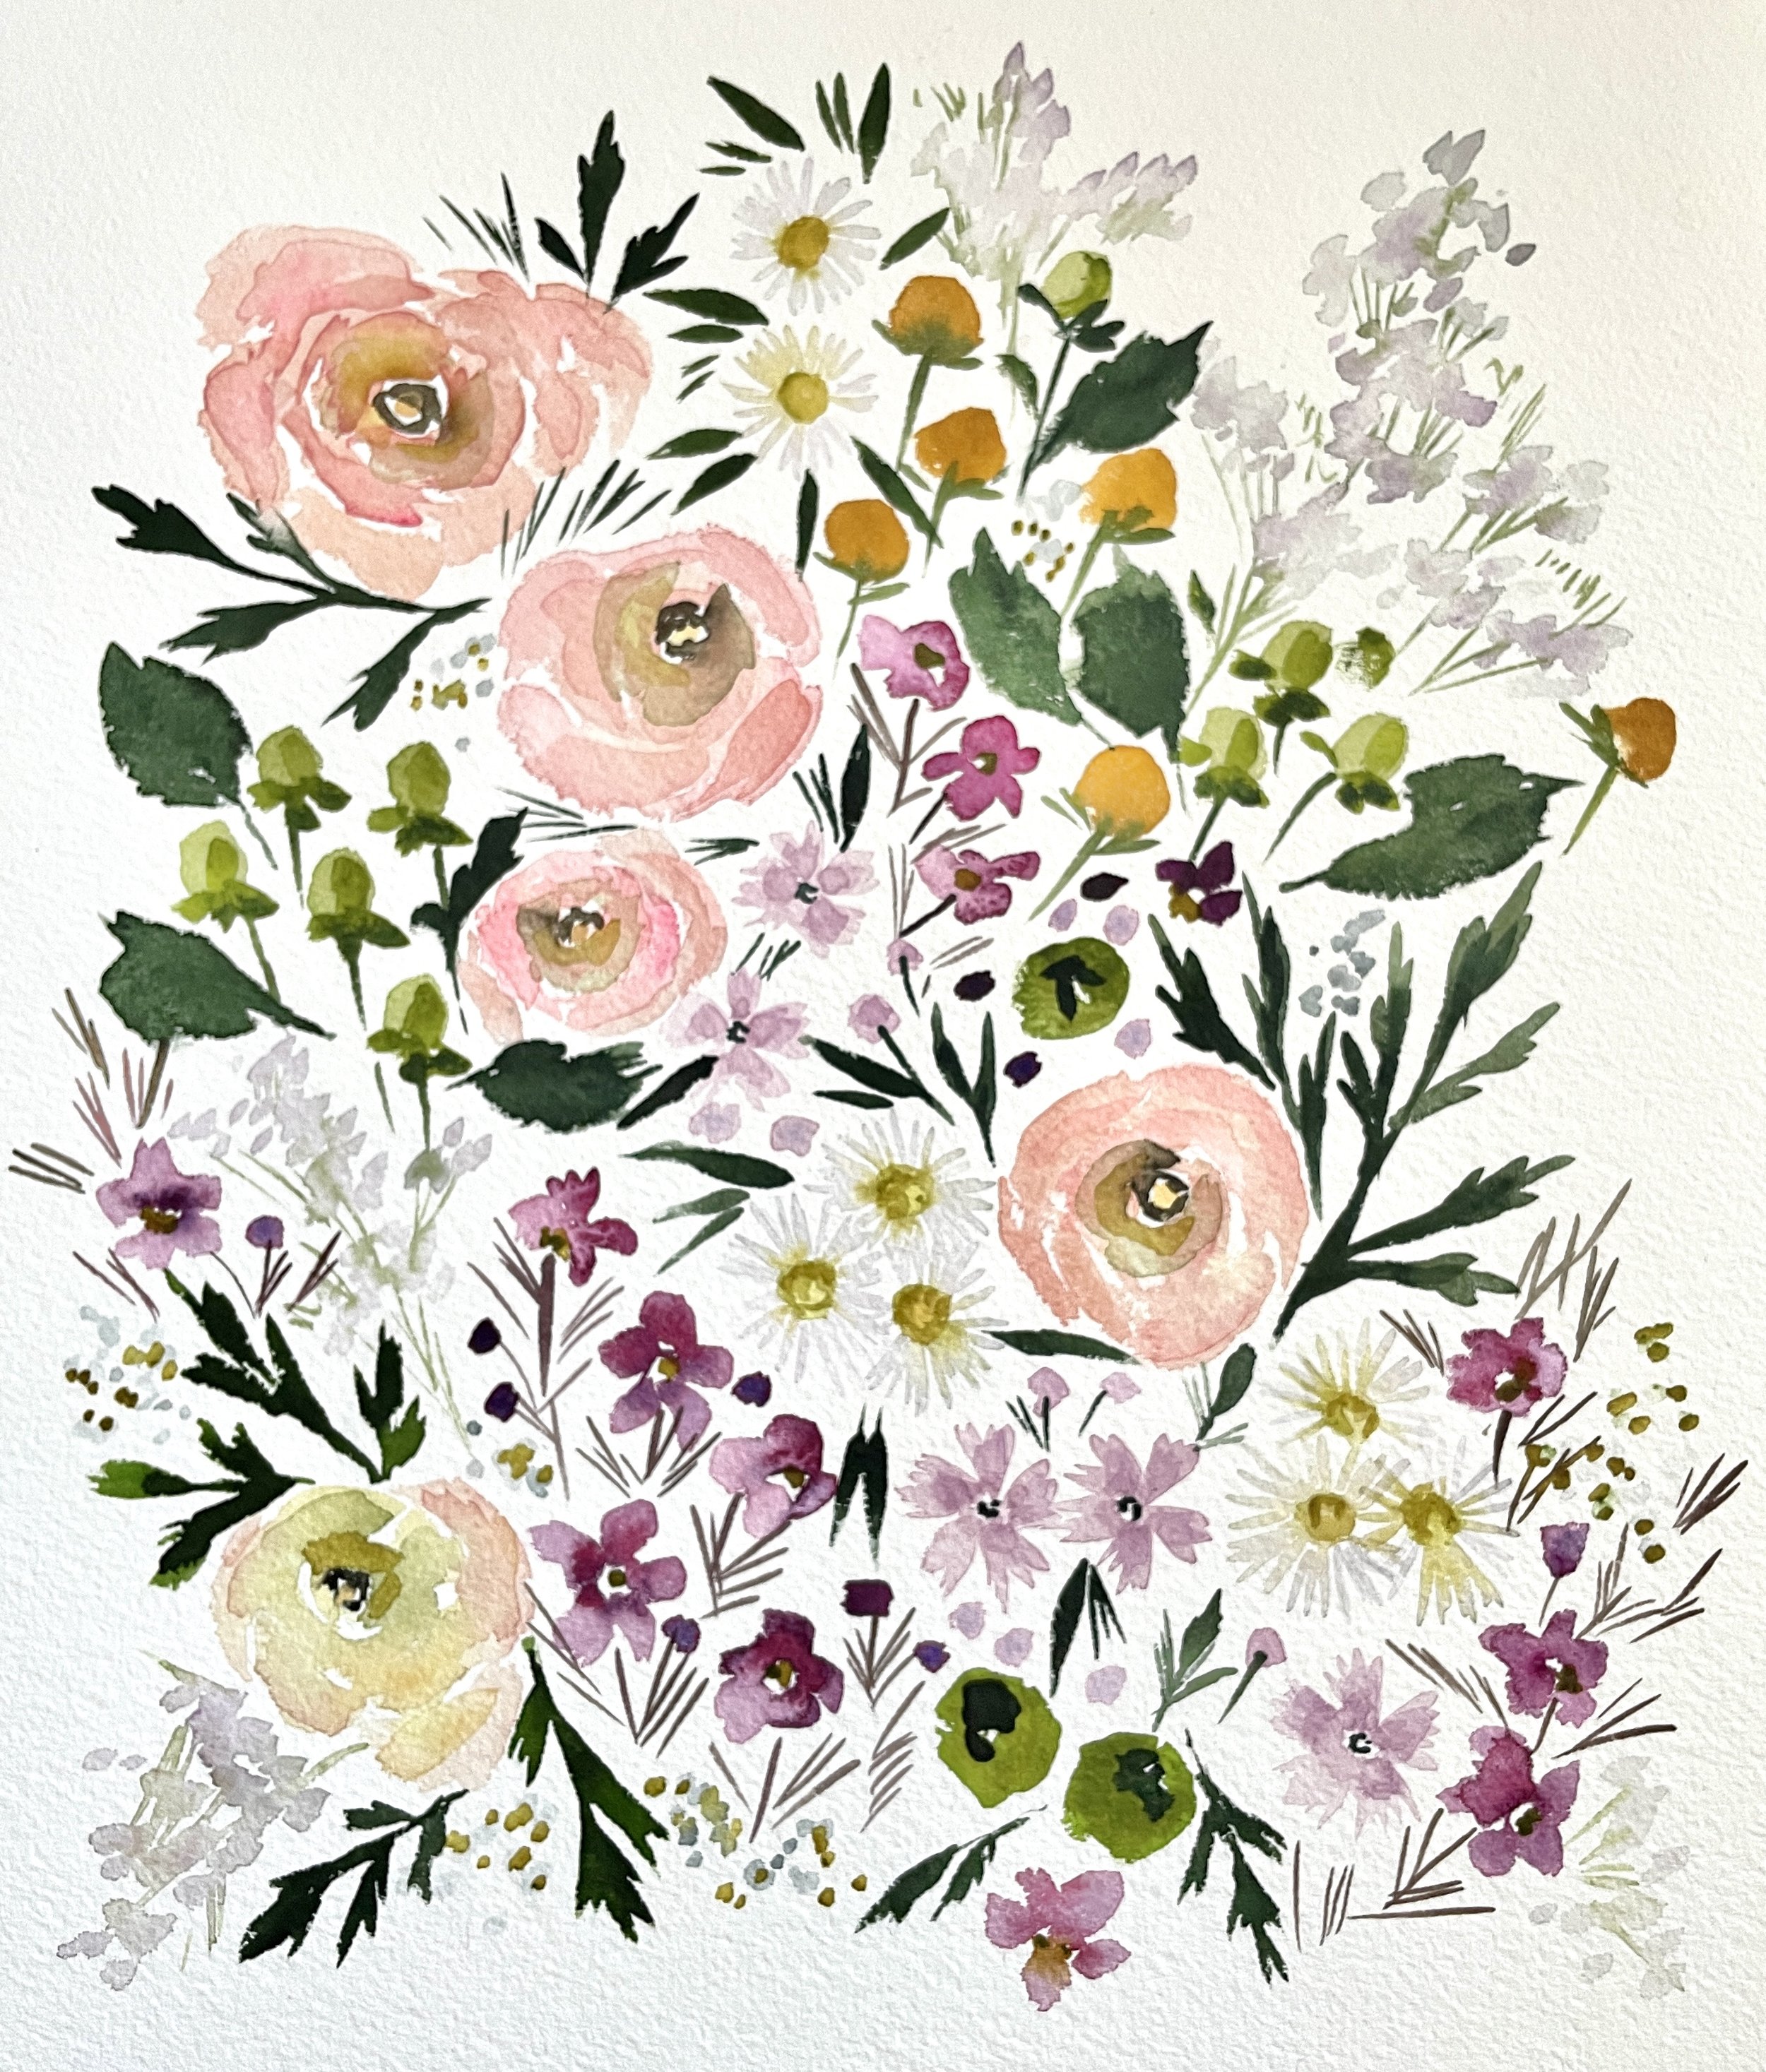 Original Watercolor Floral Painting on 11x14 Inch Cotton Paper with  Ranunculus Bouquet and Foliage — Kara Aina Art